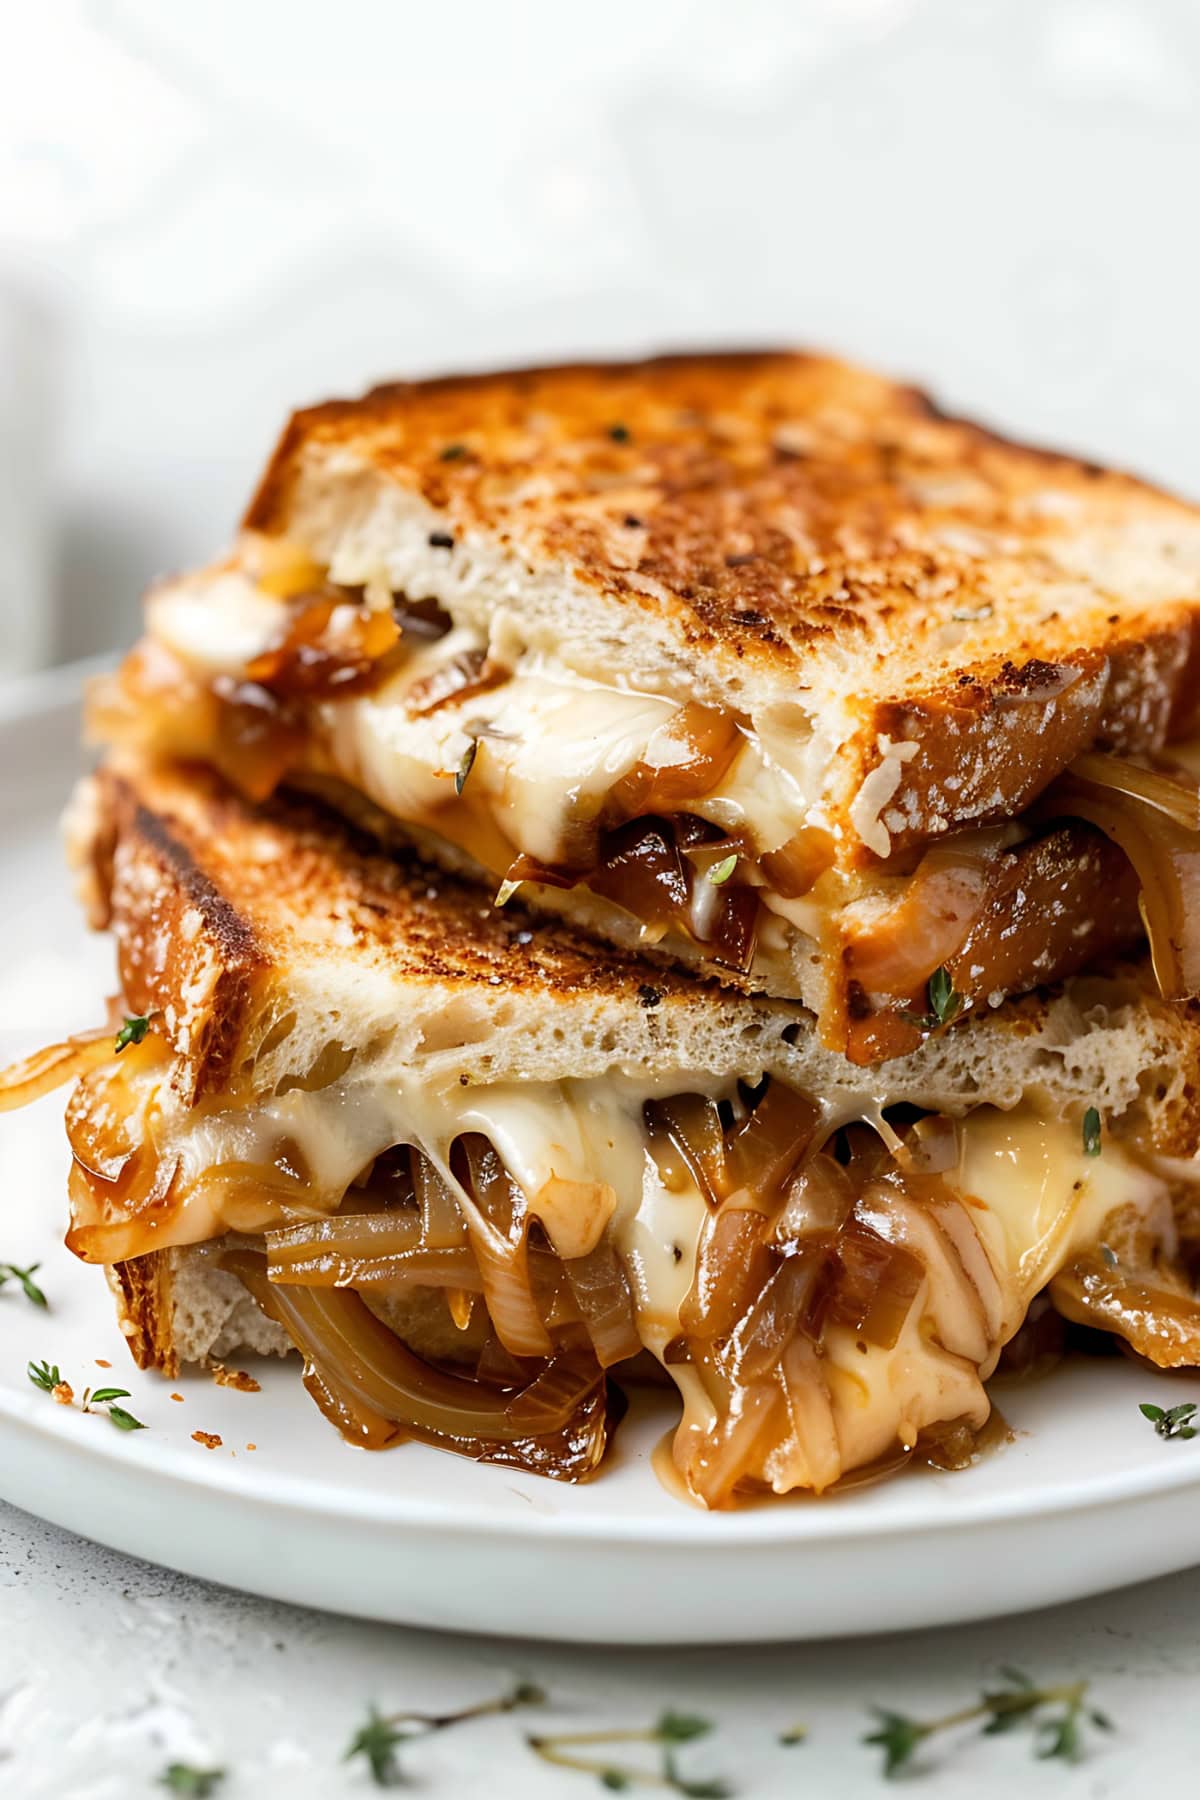 Sliced French Onion Grilled Cheese Sandwich overflowing with cheese and caramelized on a white plate